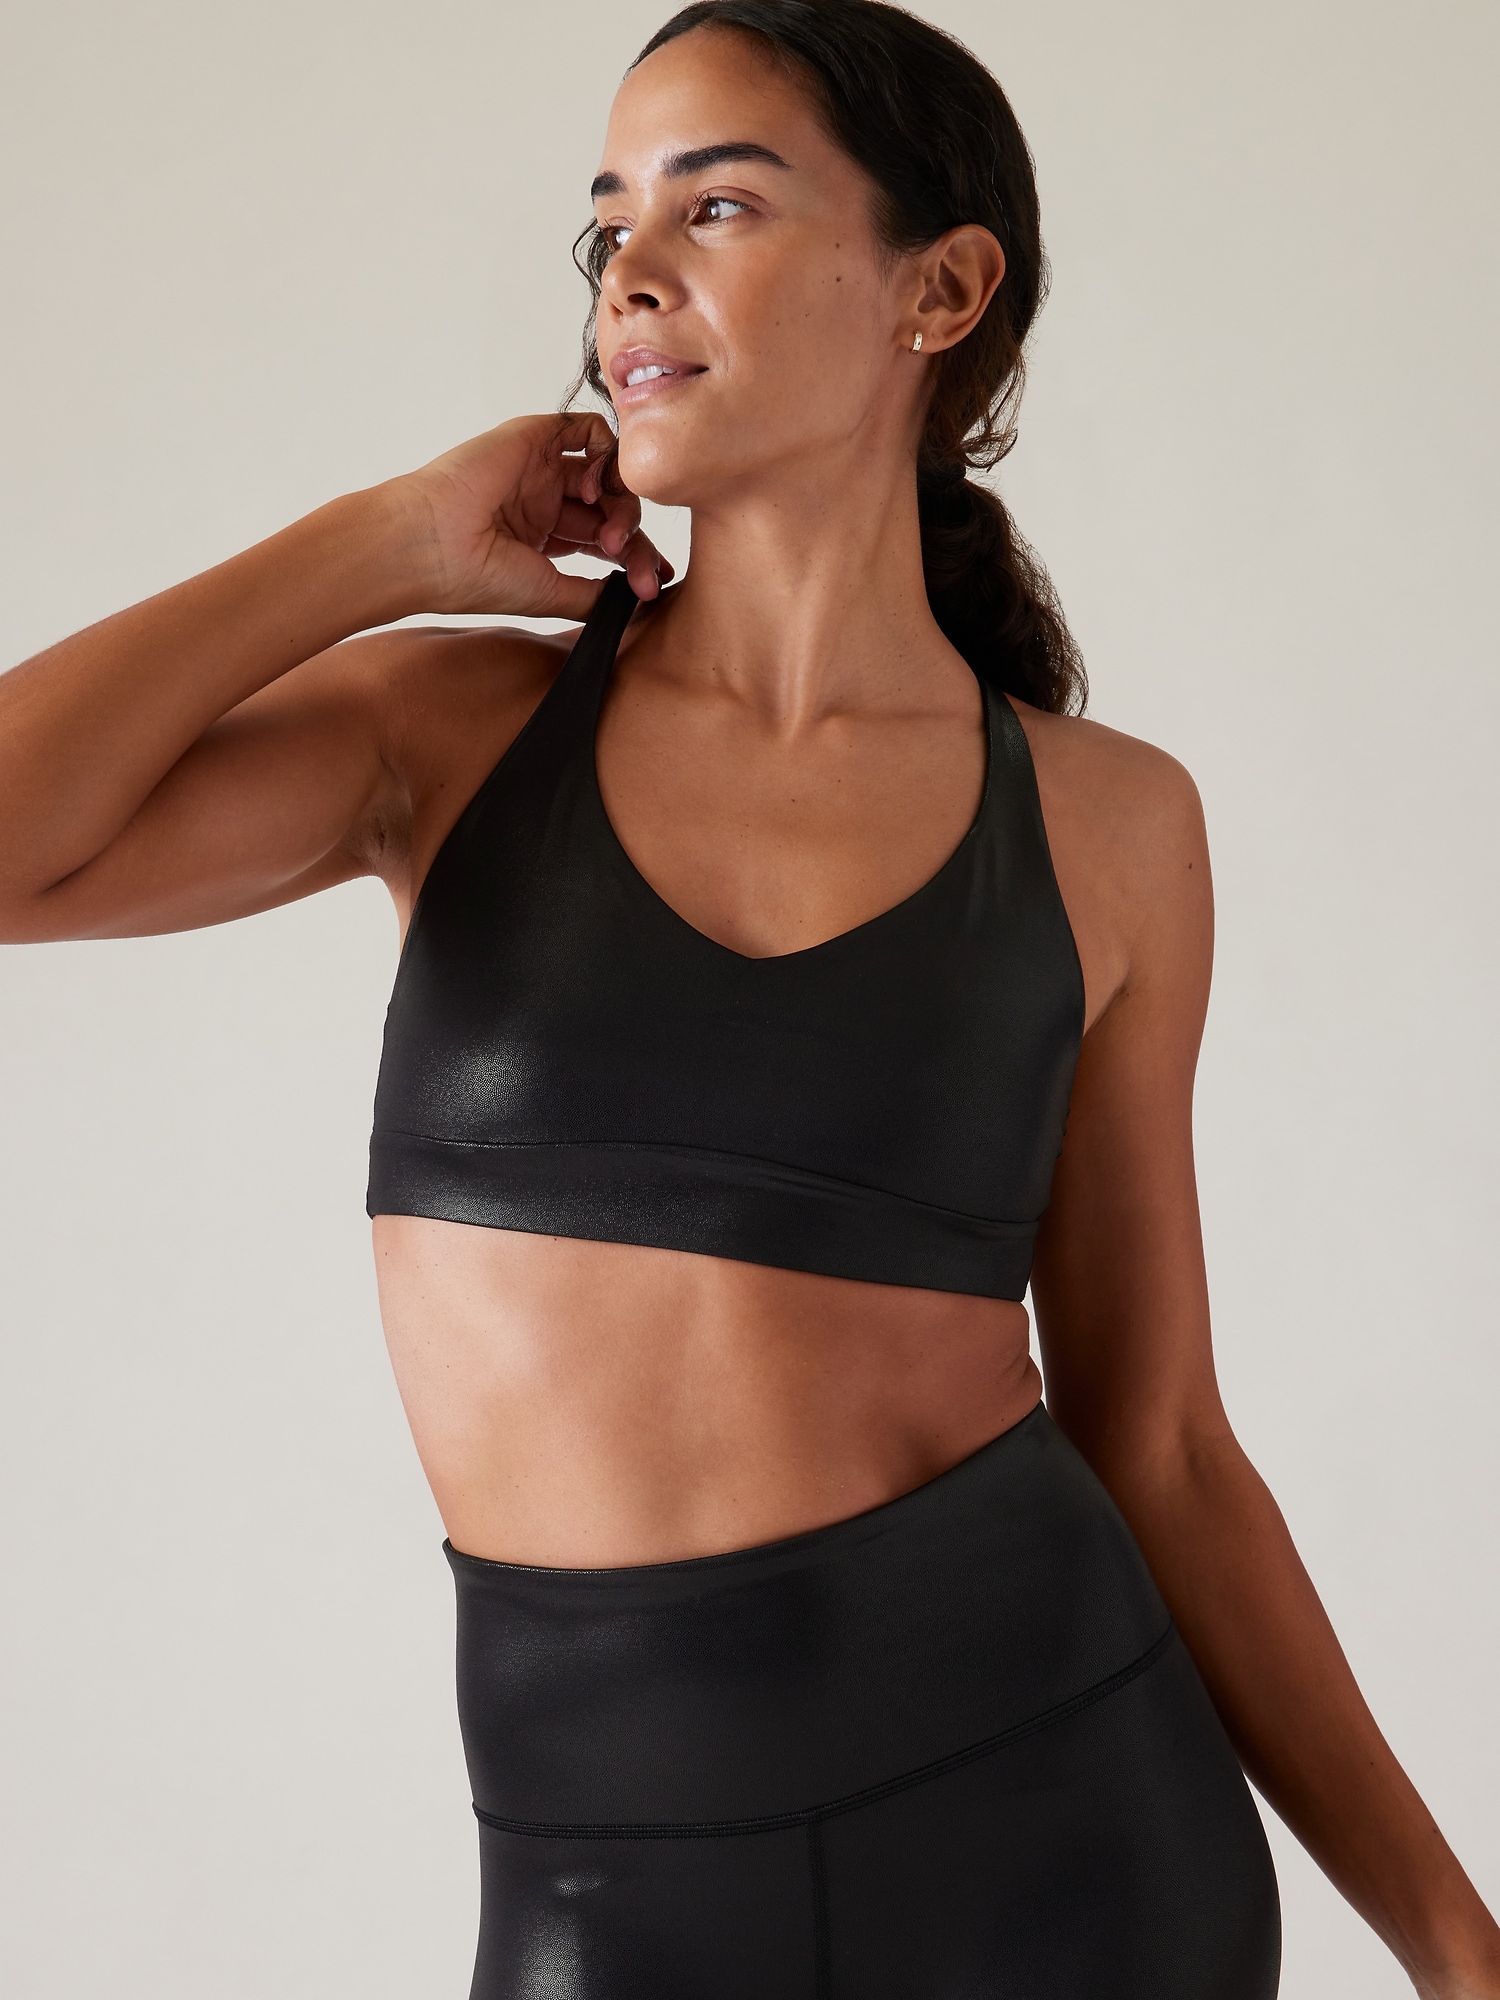 The 9 Great Sports Bras to Withstand Any Workout